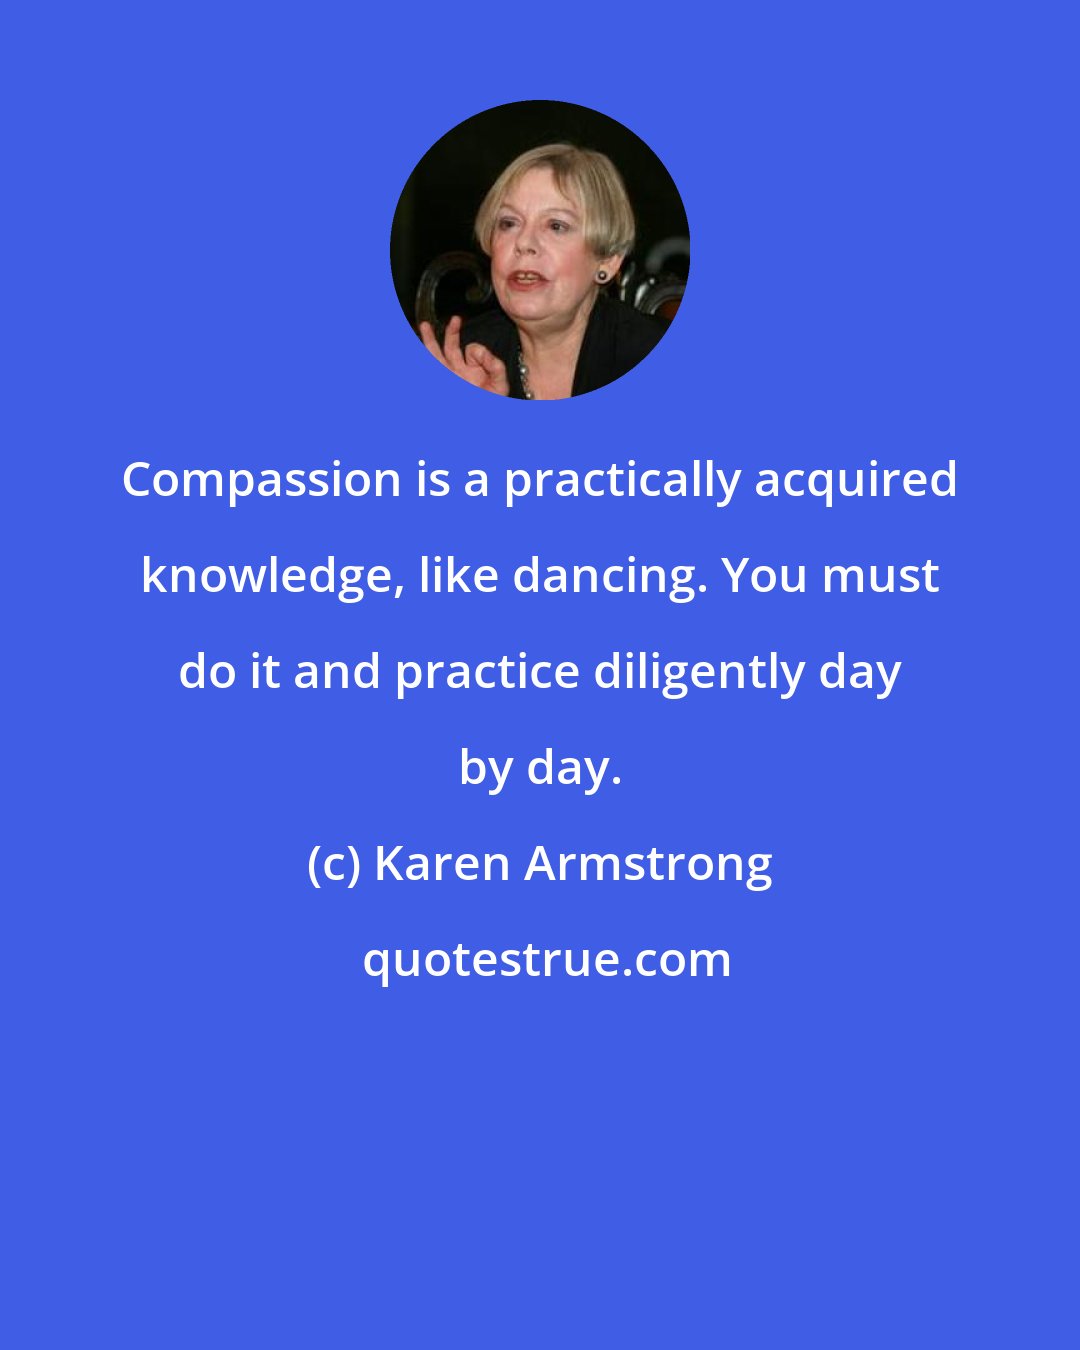 Karen Armstrong: Compassion is a practically acquired knowledge, like dancing. You must do it and practice diligently day by day.